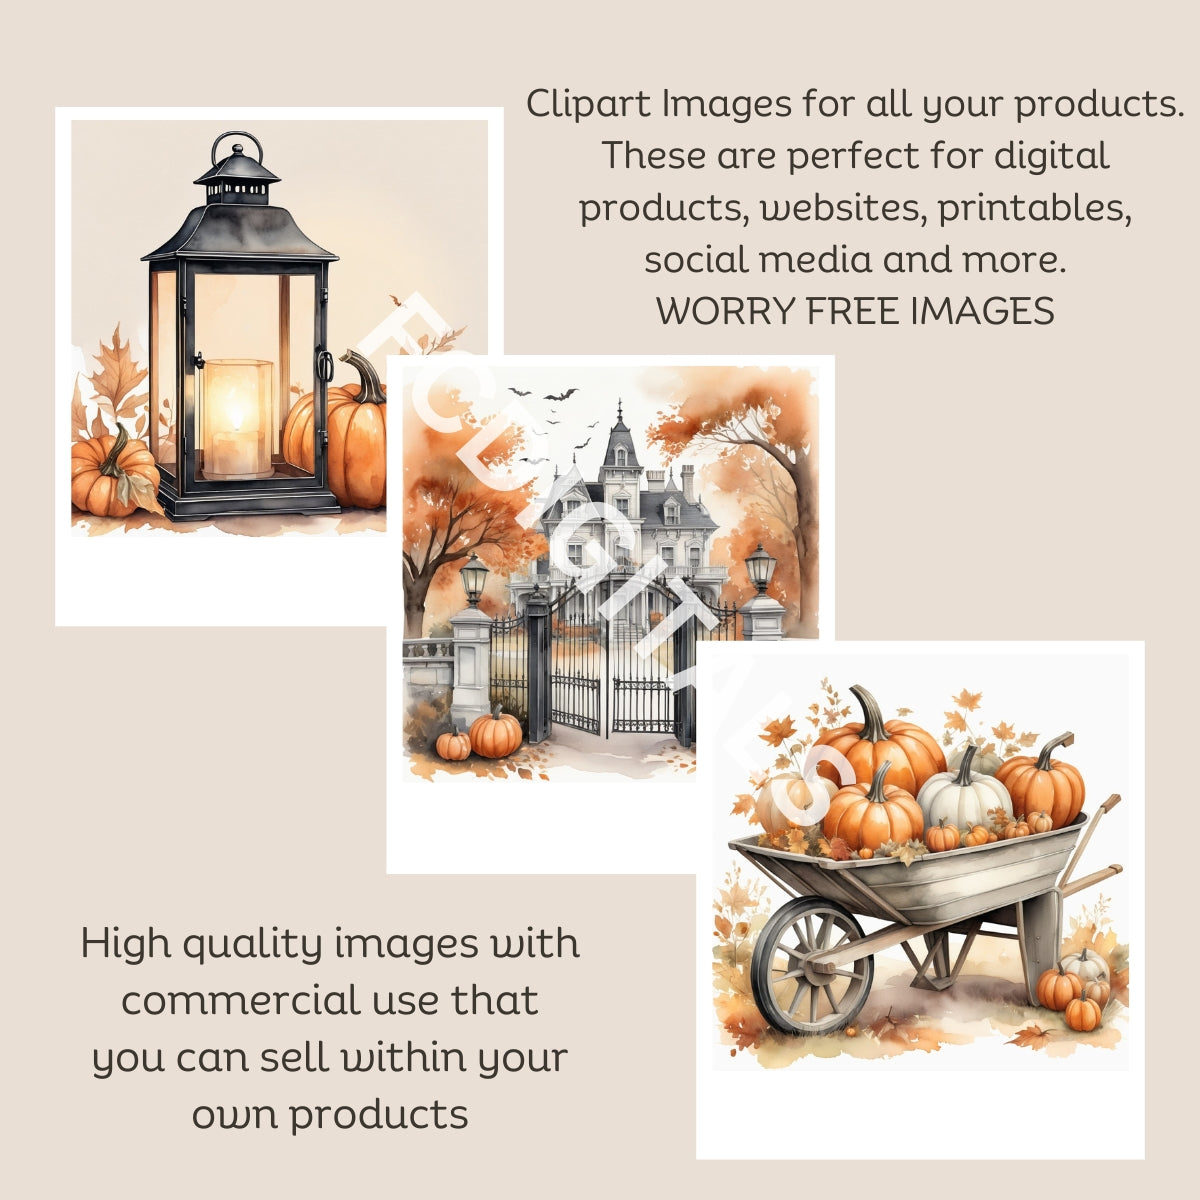 Watercolor Fall Clipart, Fall Scenes Clipart Images, Autumn Clipart with Commercial Use, High Quality JPG Images, Printables, Wall Art Images